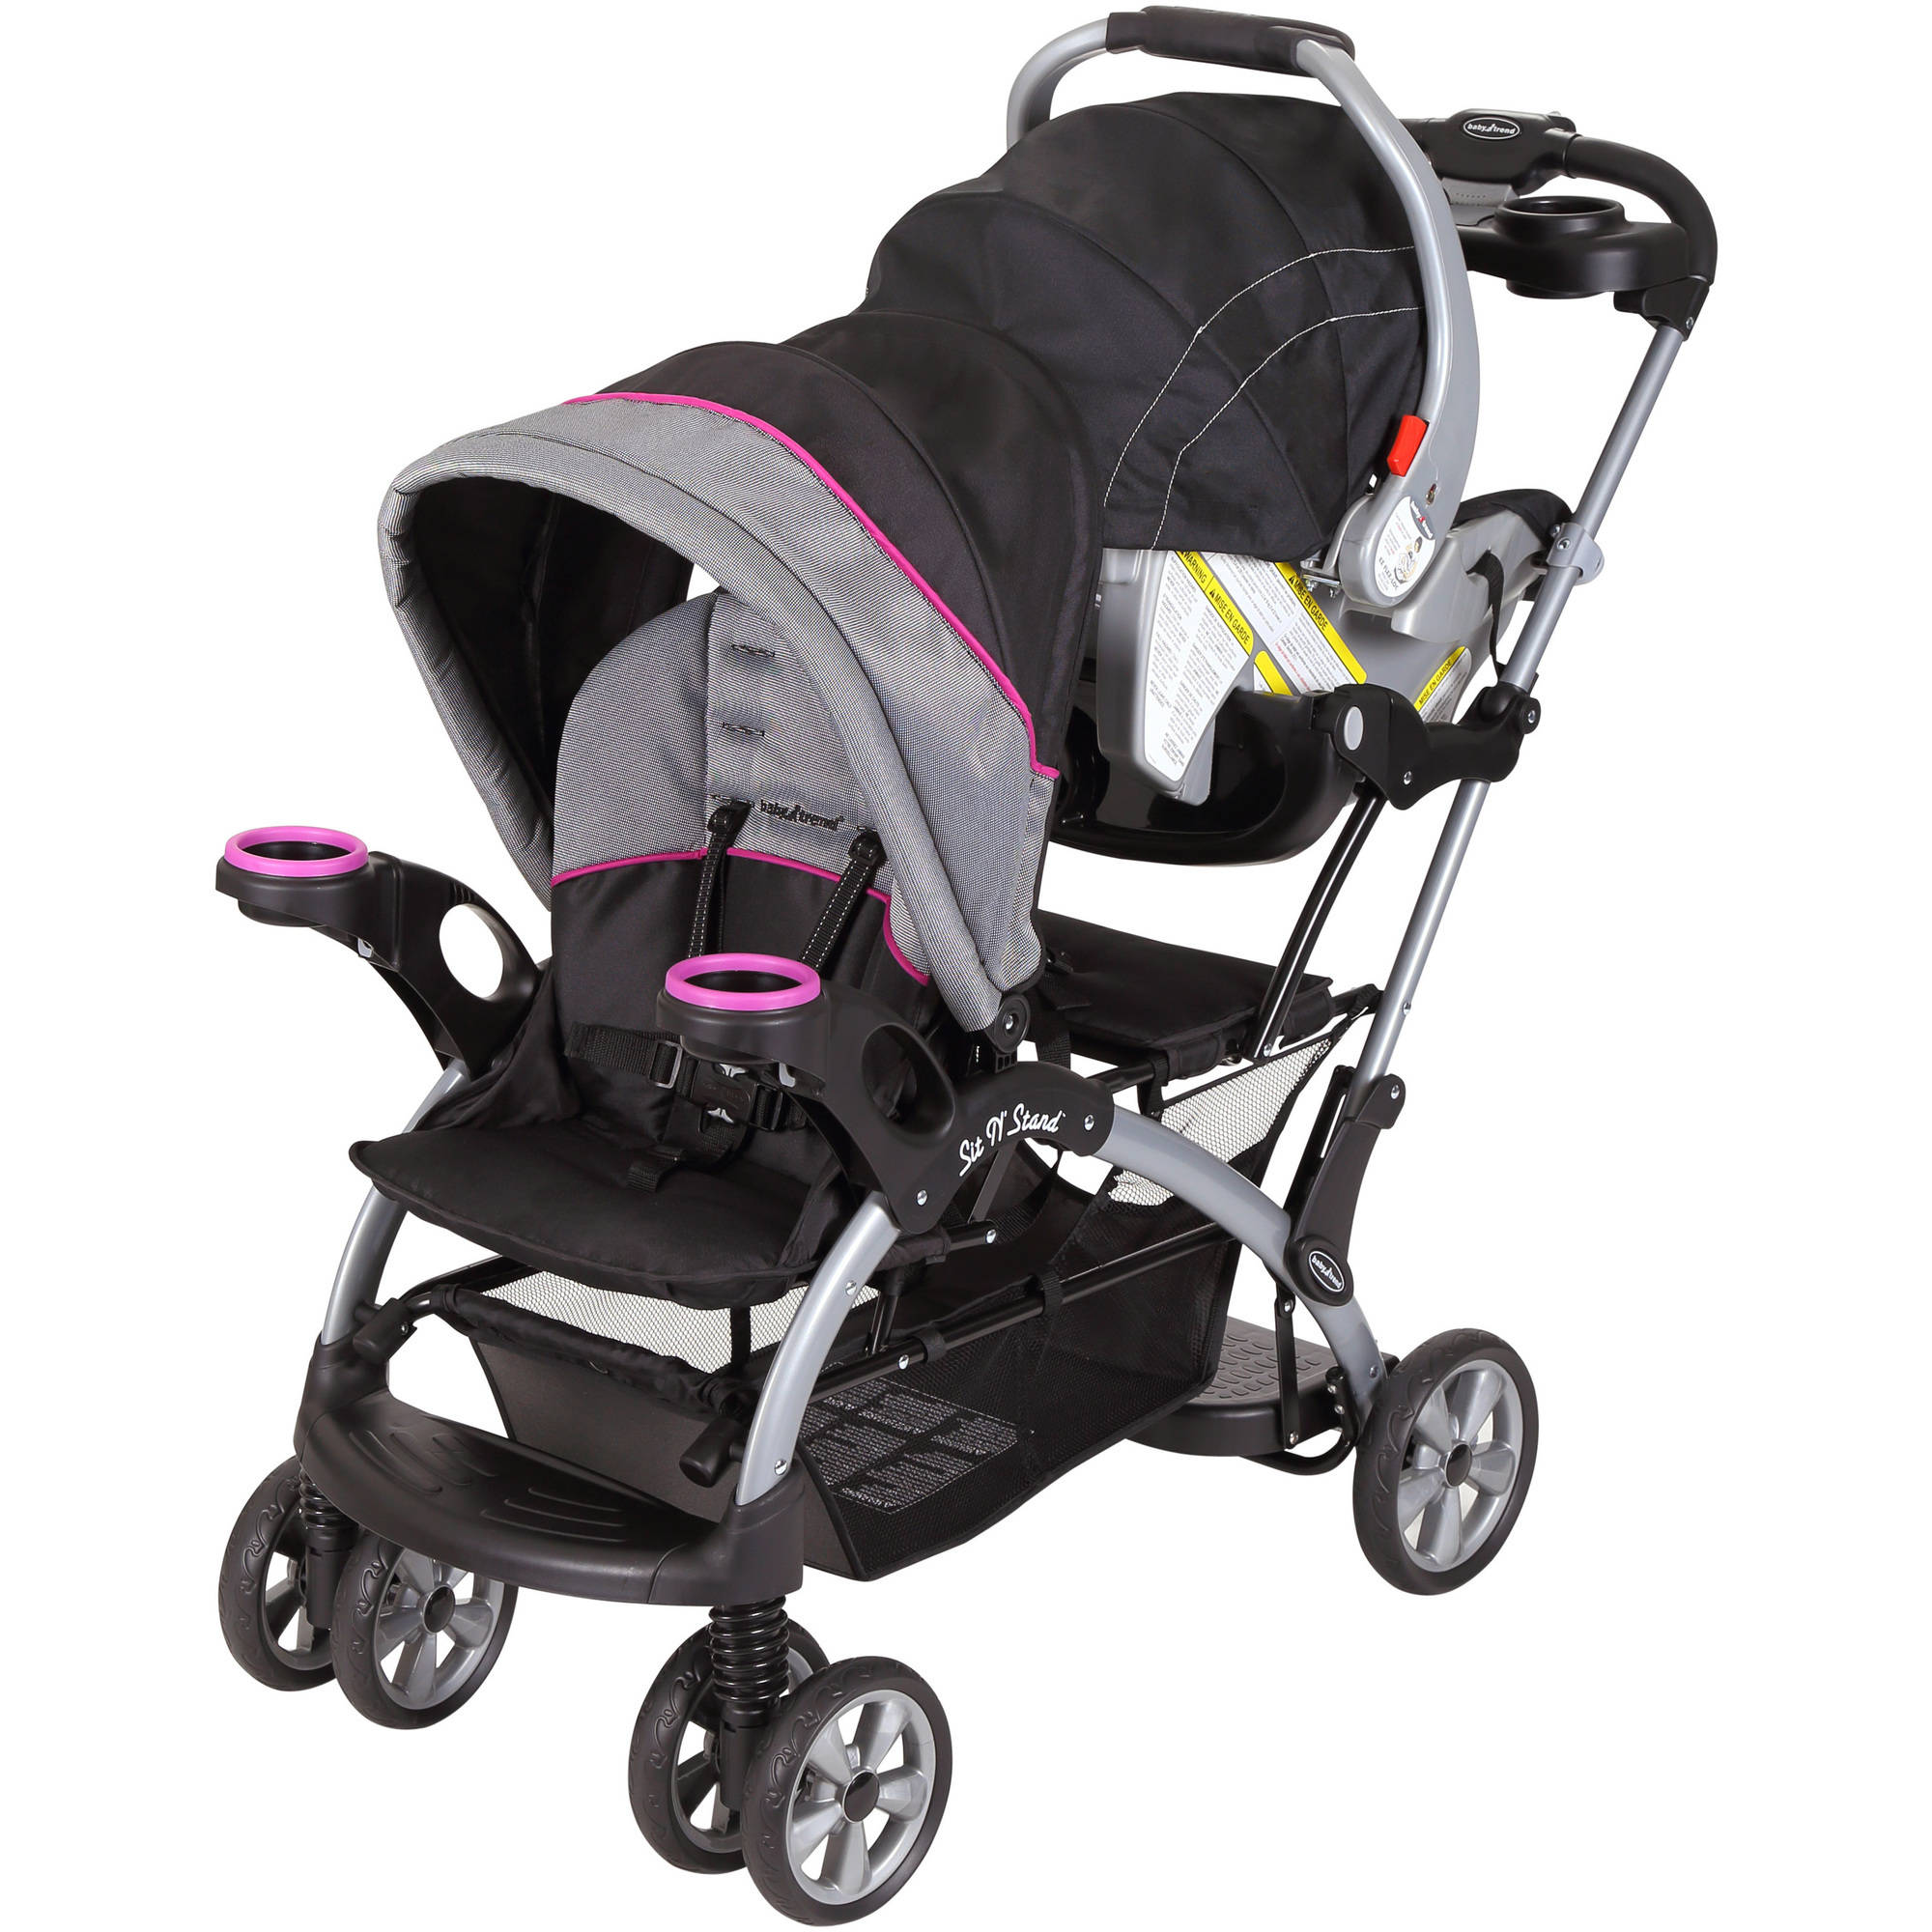 Best Sit And Stand Stroller Of 2020 - Inner Parents